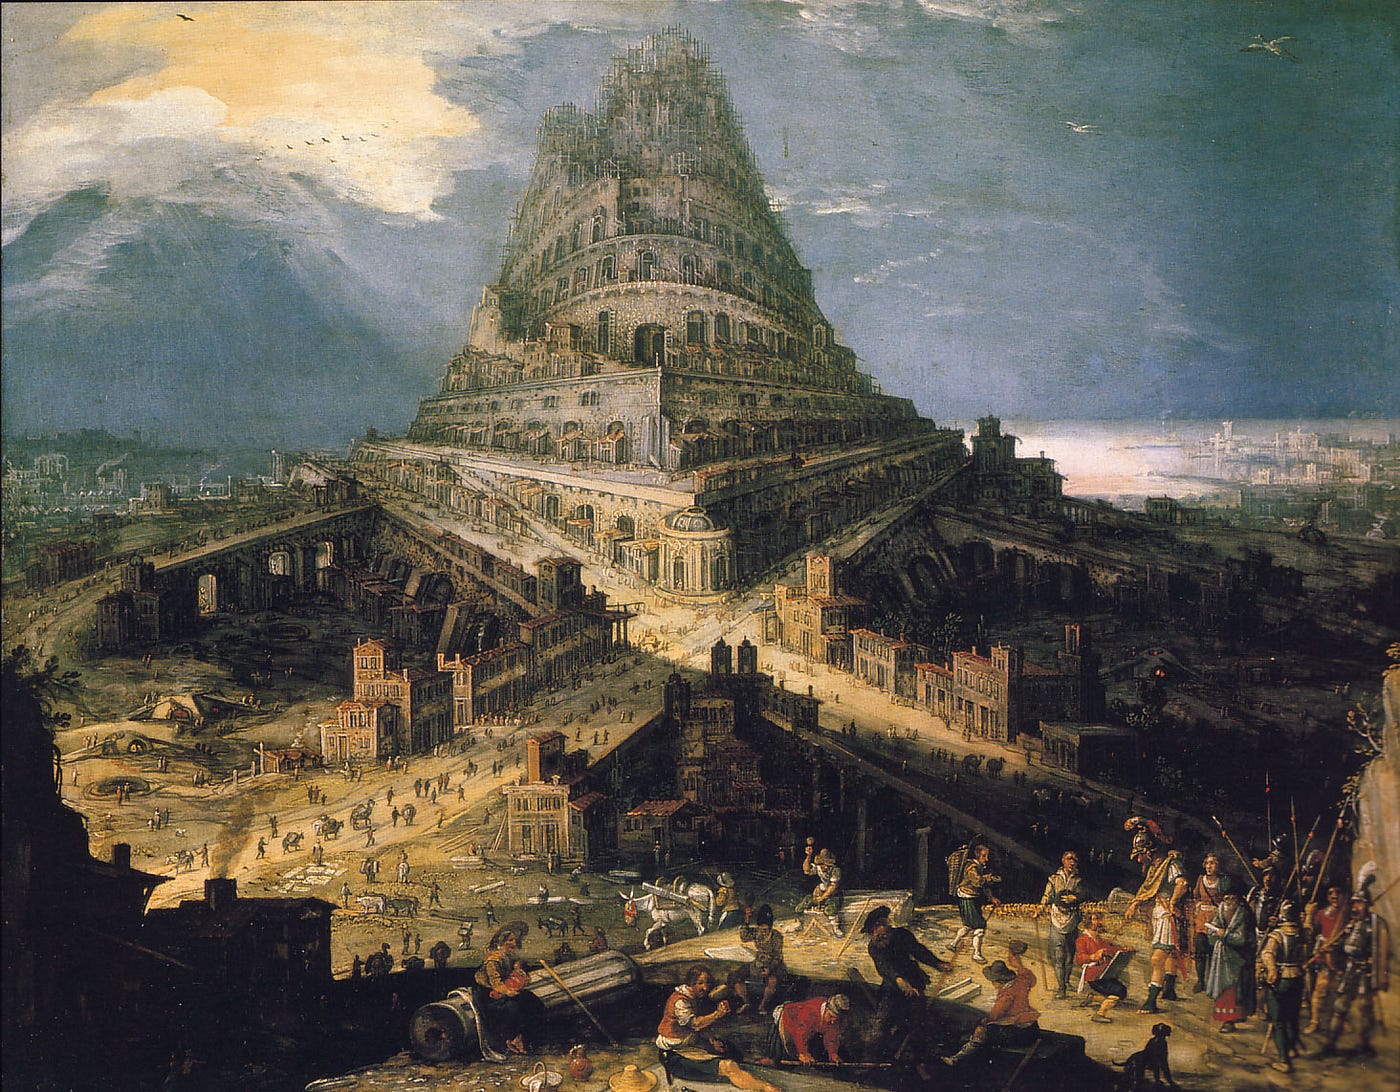 Losing ourselves in the Tower of (Risk) Babel